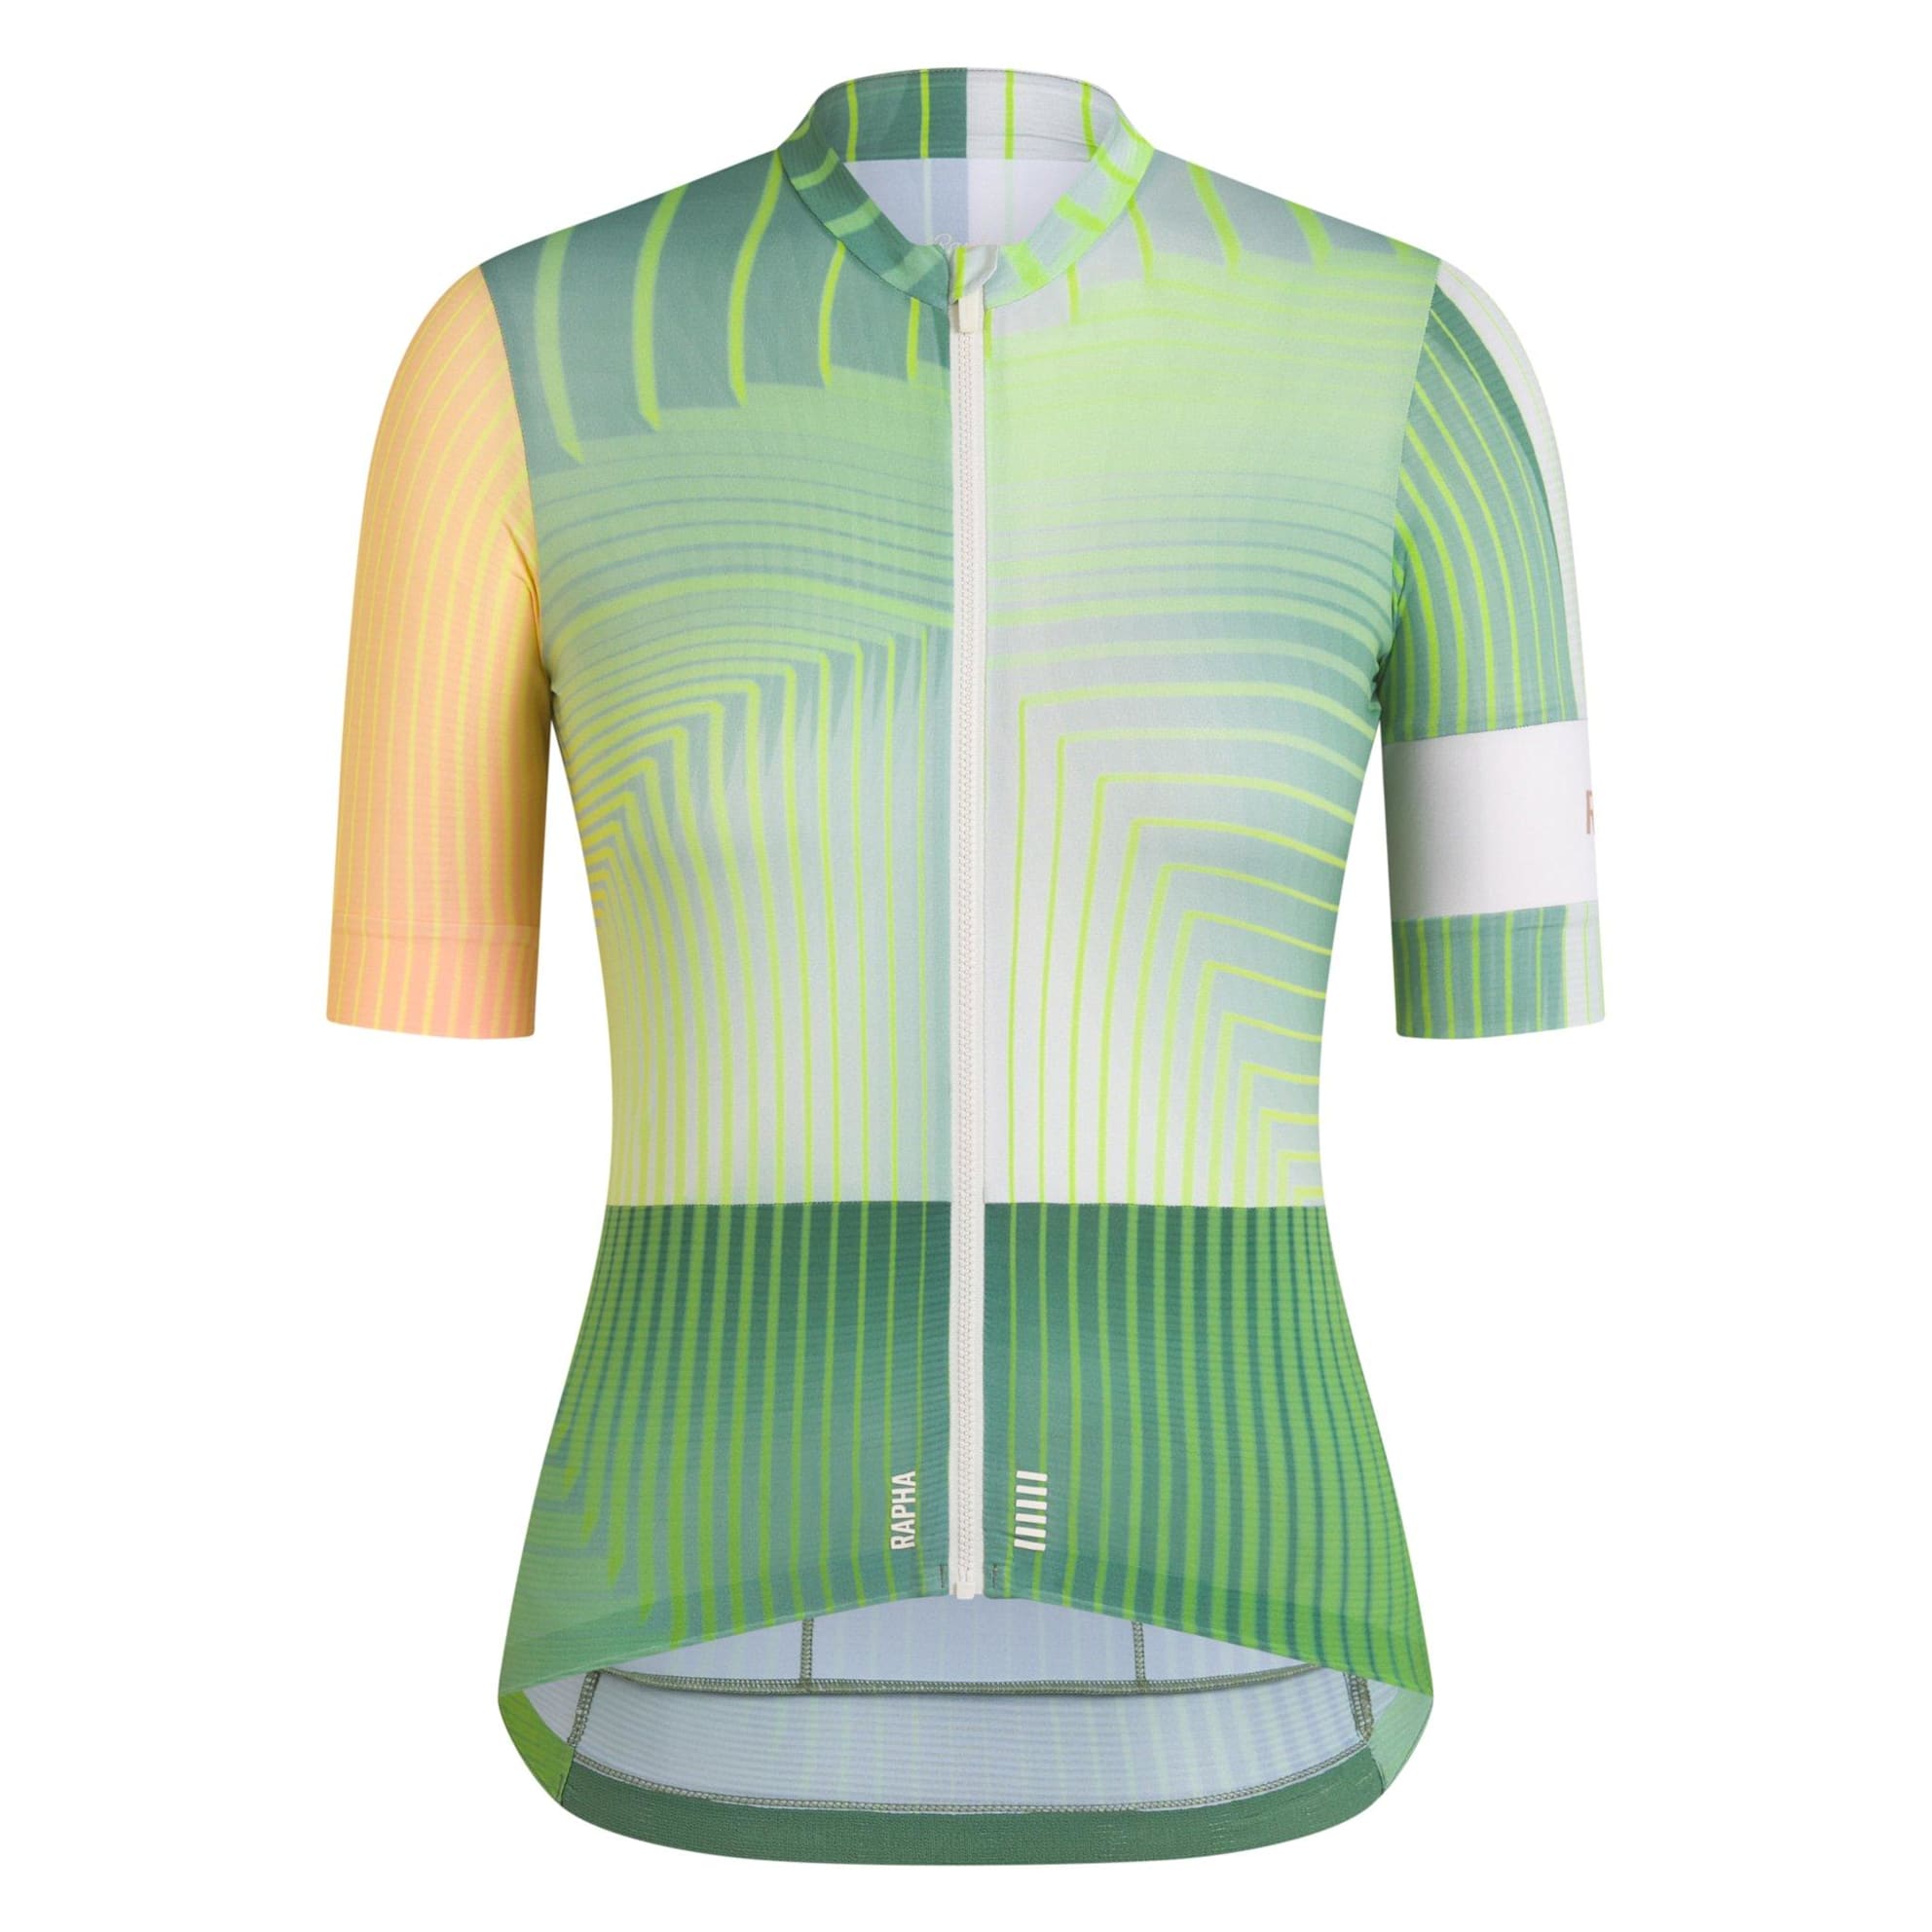 ishrana točno odgovor  The World's Finest Cycling Clothing and Accessories. | Rapha